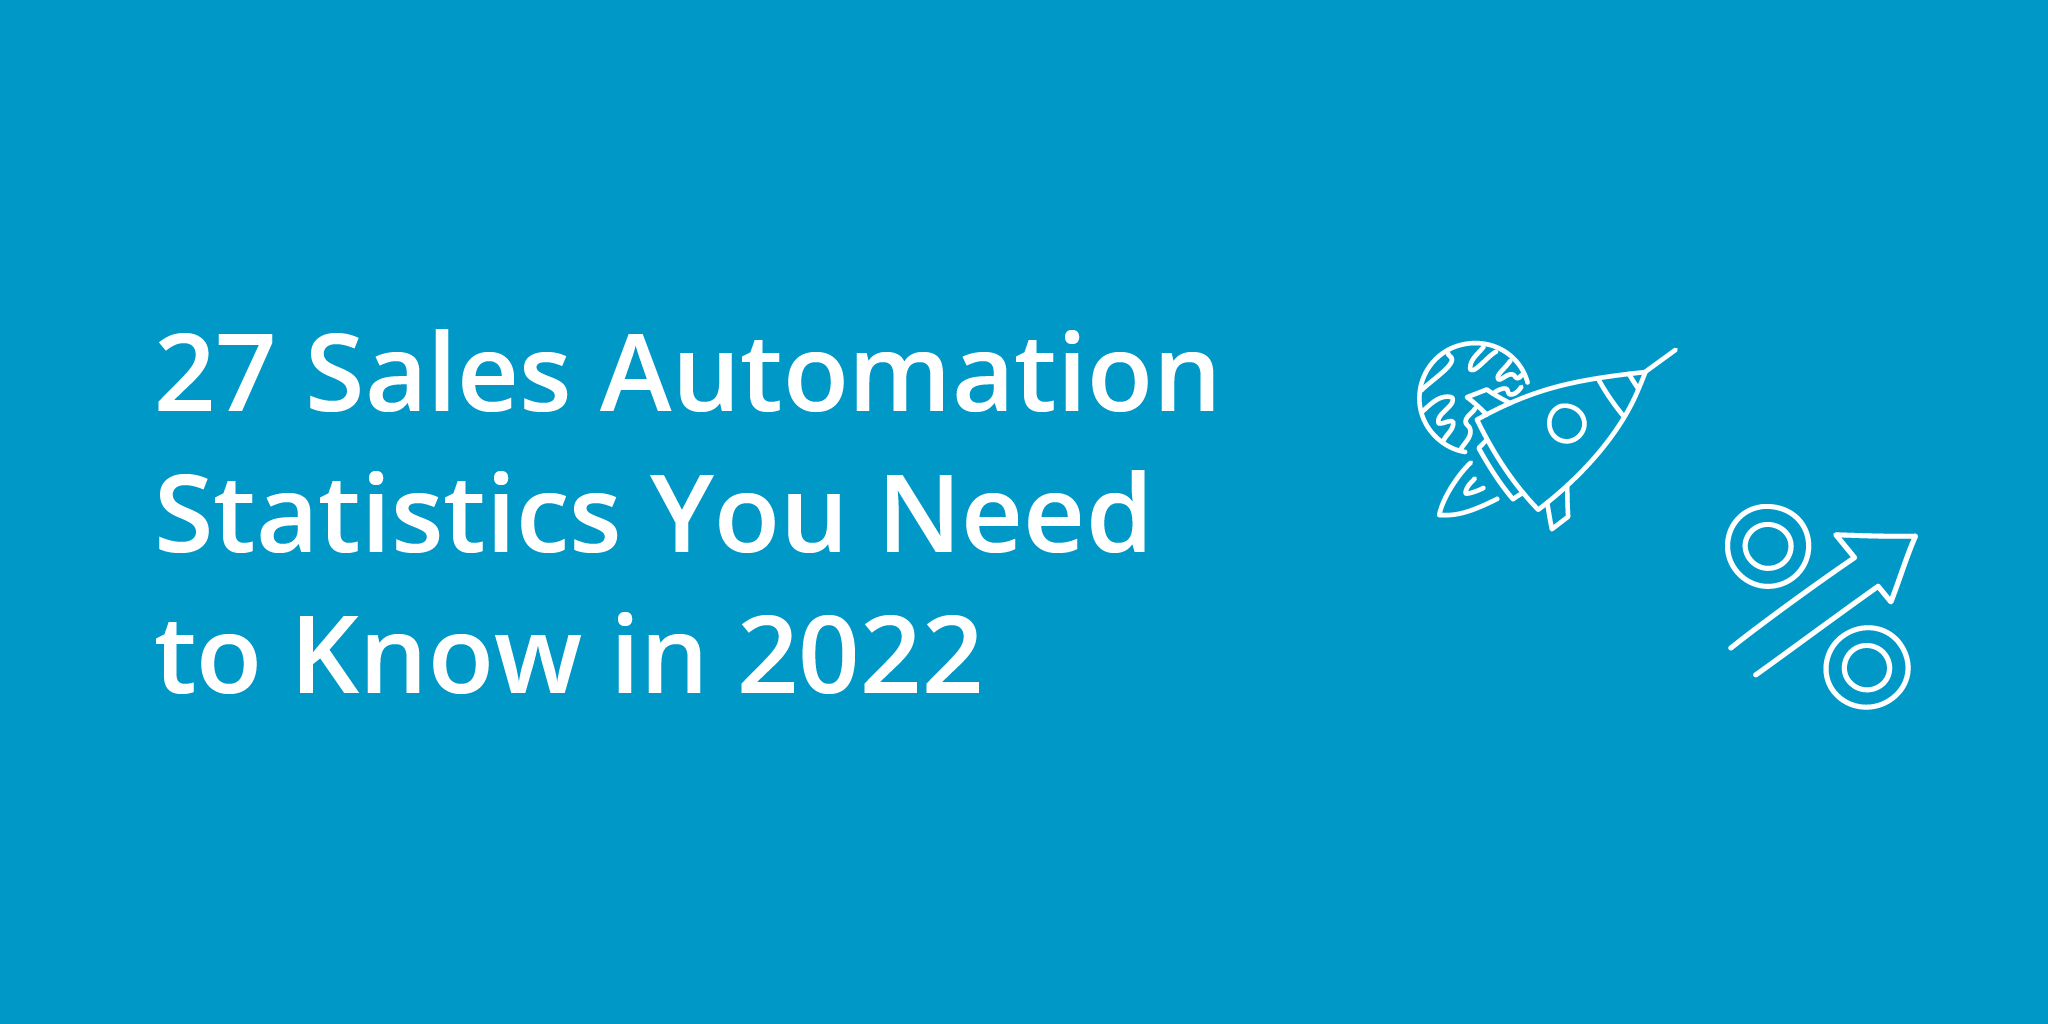 27 Sales Automation Statistics You Need to Know in 2022 | Telephones for business